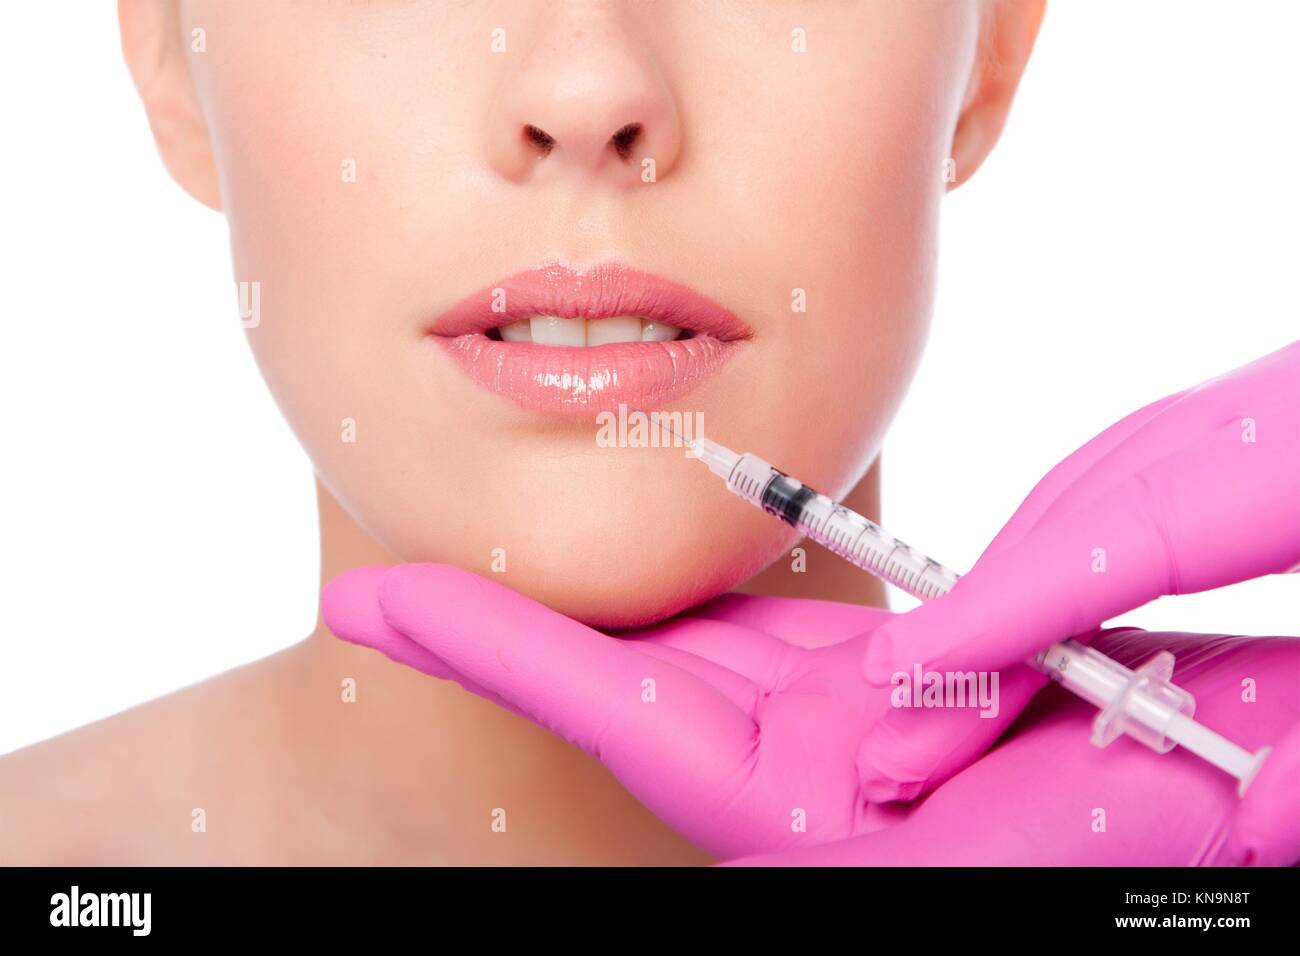 Beautiful plump lips injection with collagen filler Cosmetic spa beauty treatment with pink gloves, on white. Stock Photo